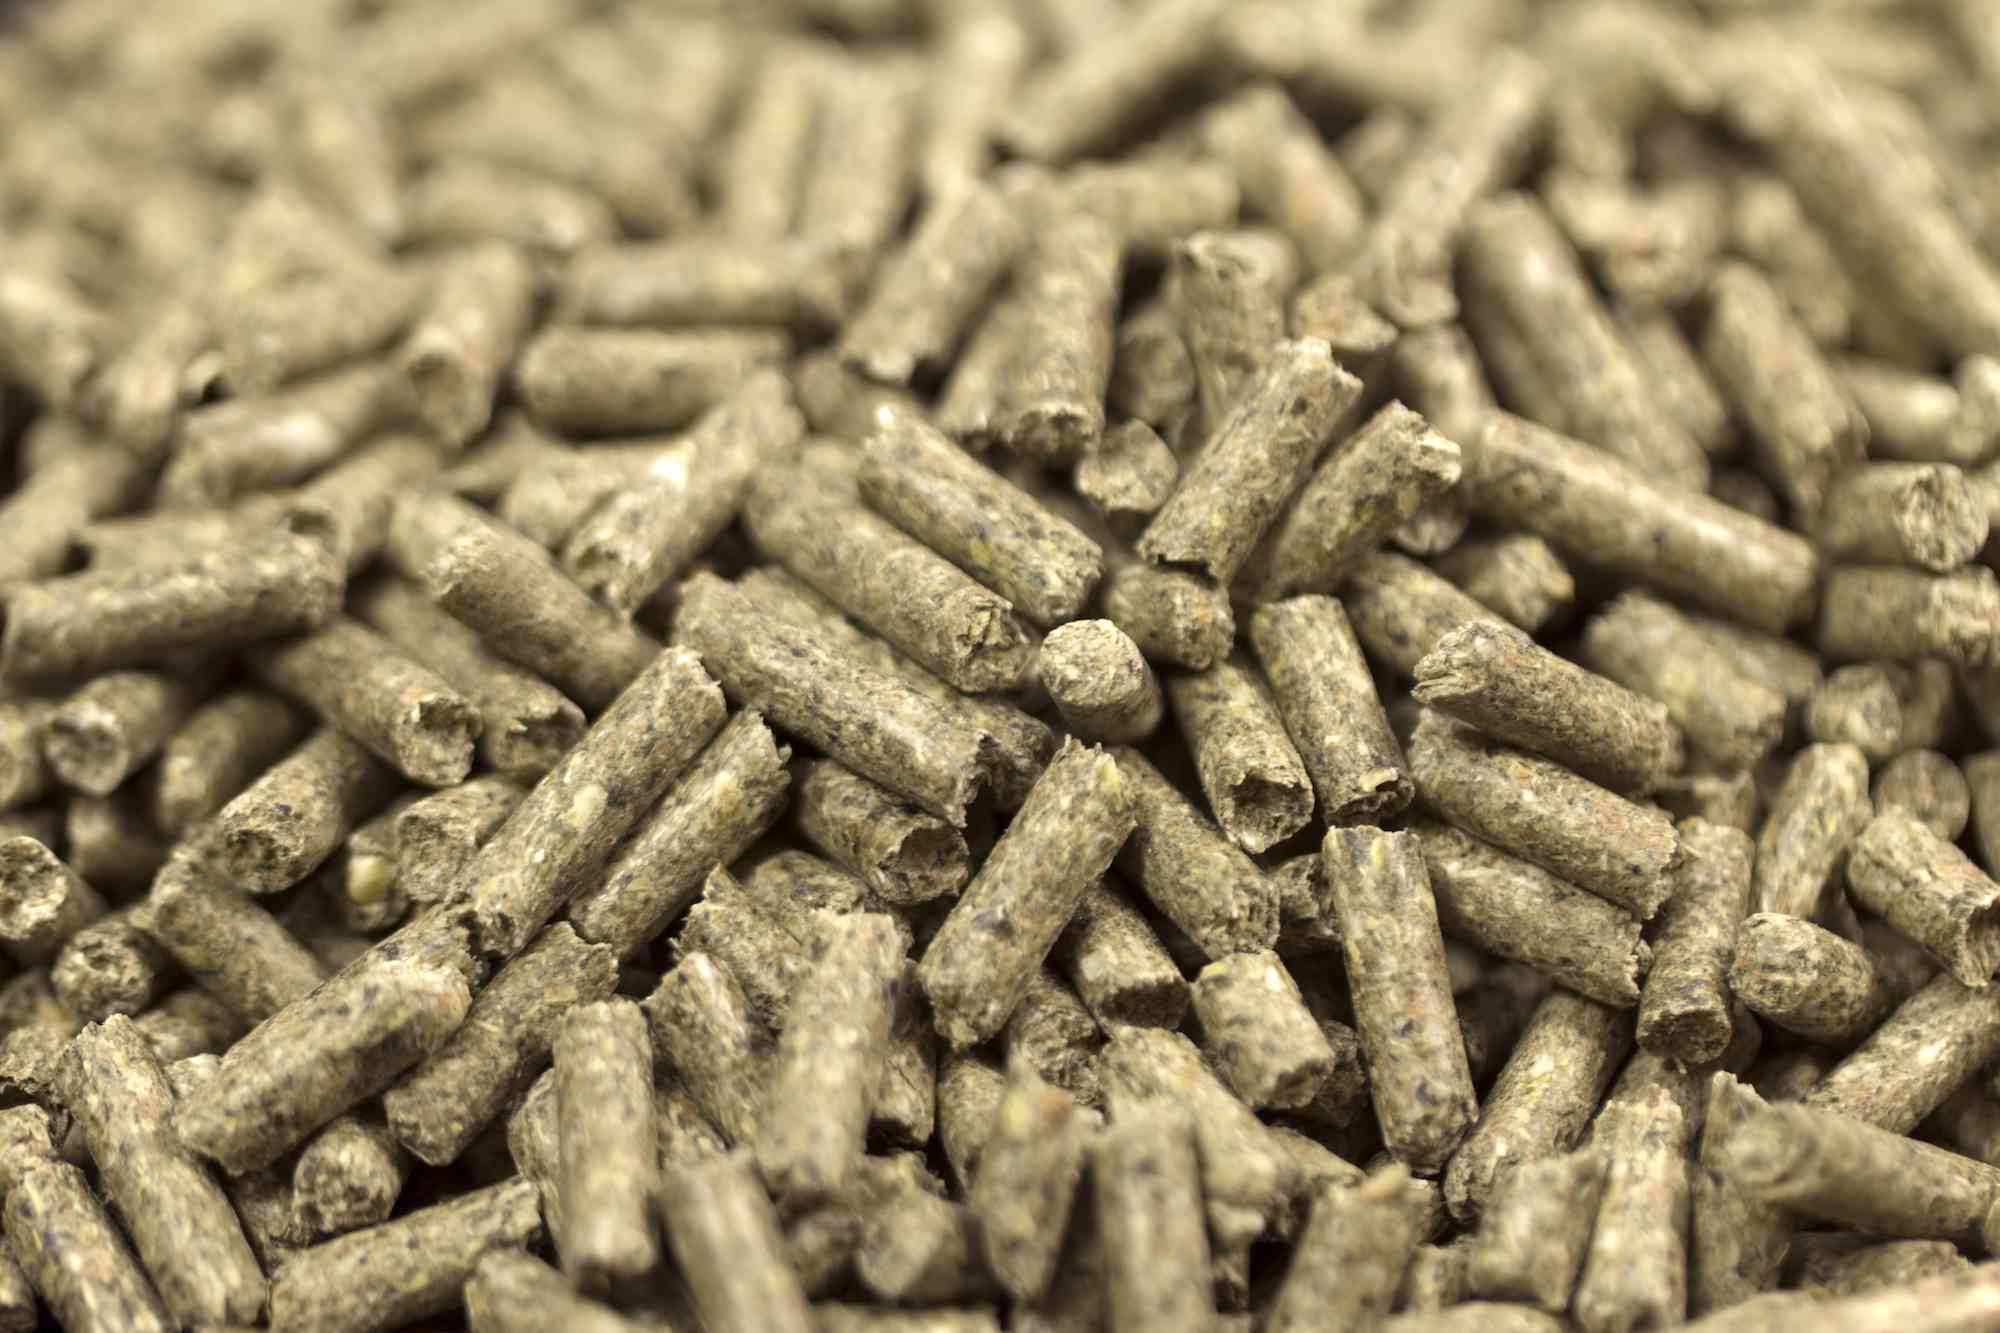 Rabbit pellets can be used to make your own infusoria at home